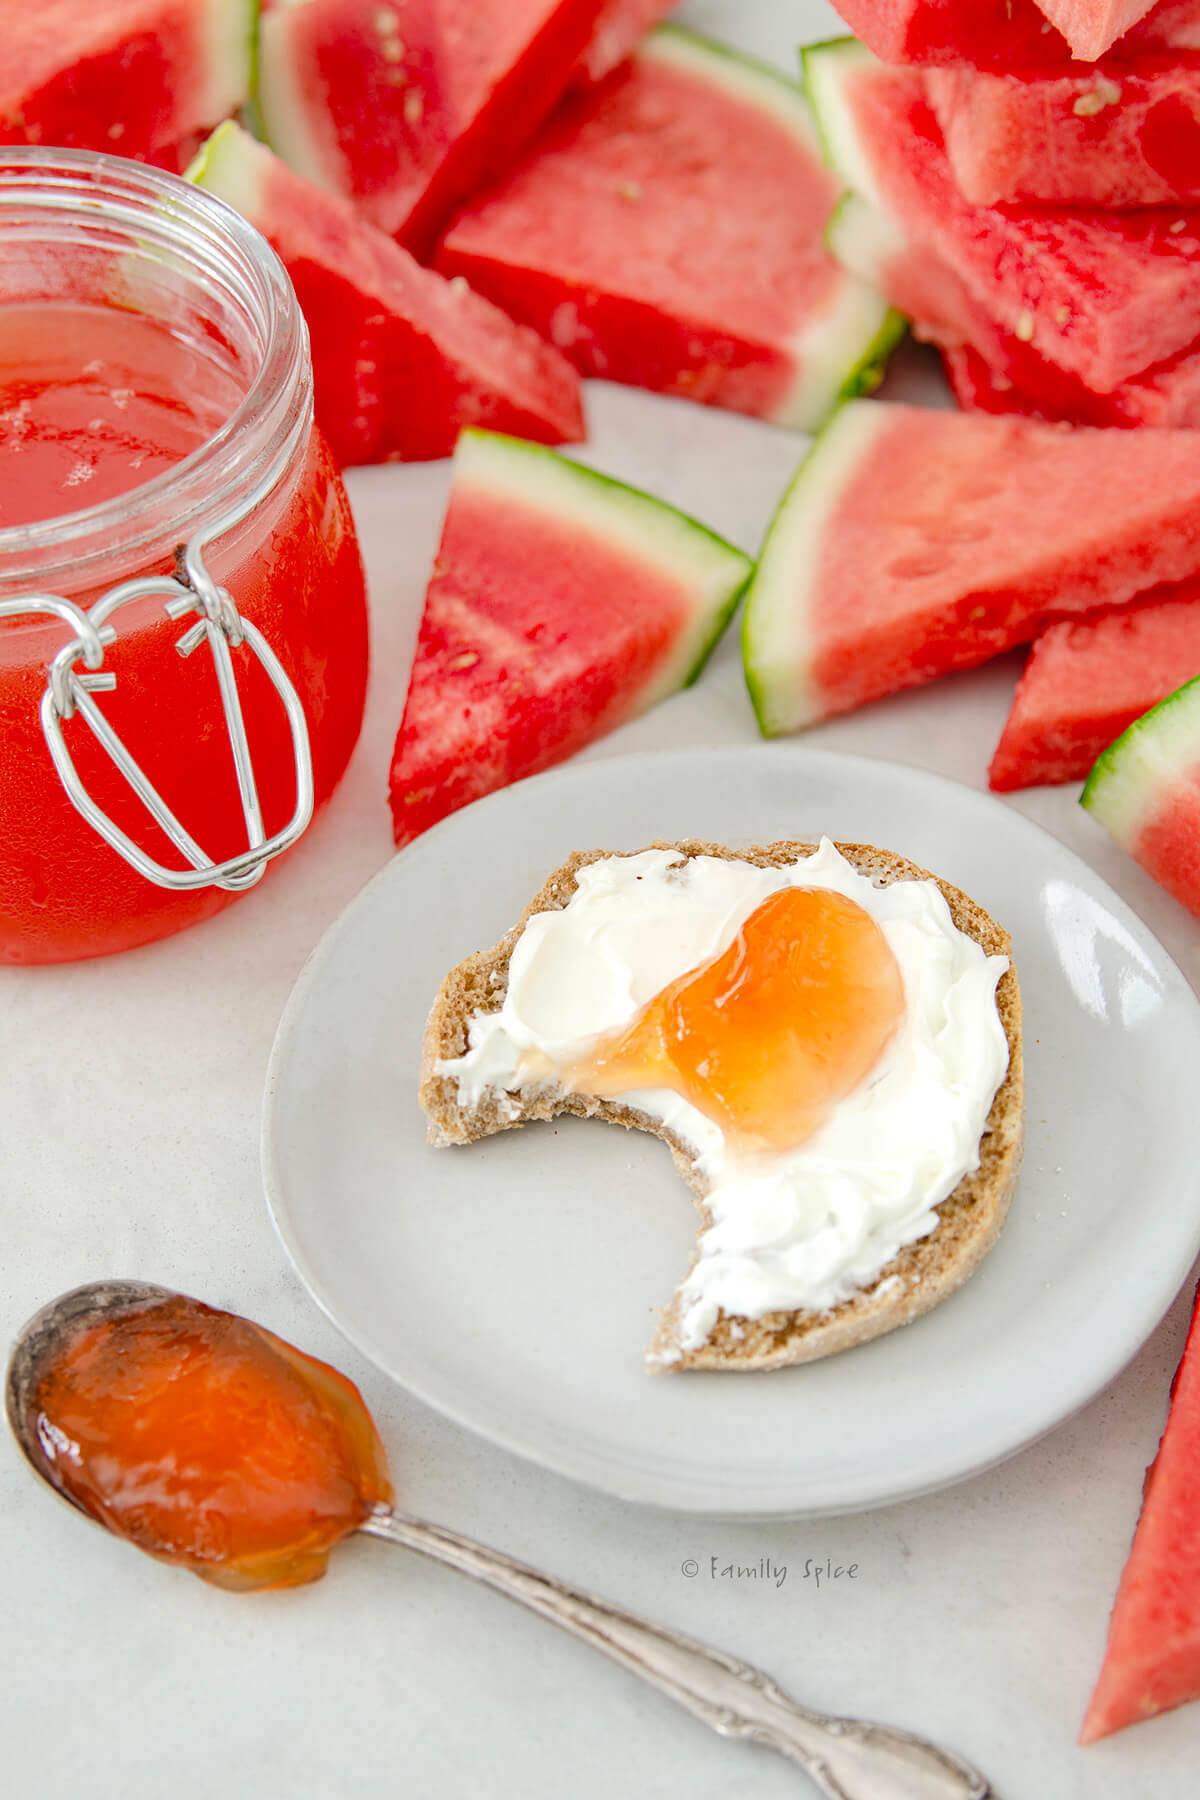 Half a whole wheat English muffin with cream cheese and topped with watermelon jelly with a bite taken out and watermelon behind it